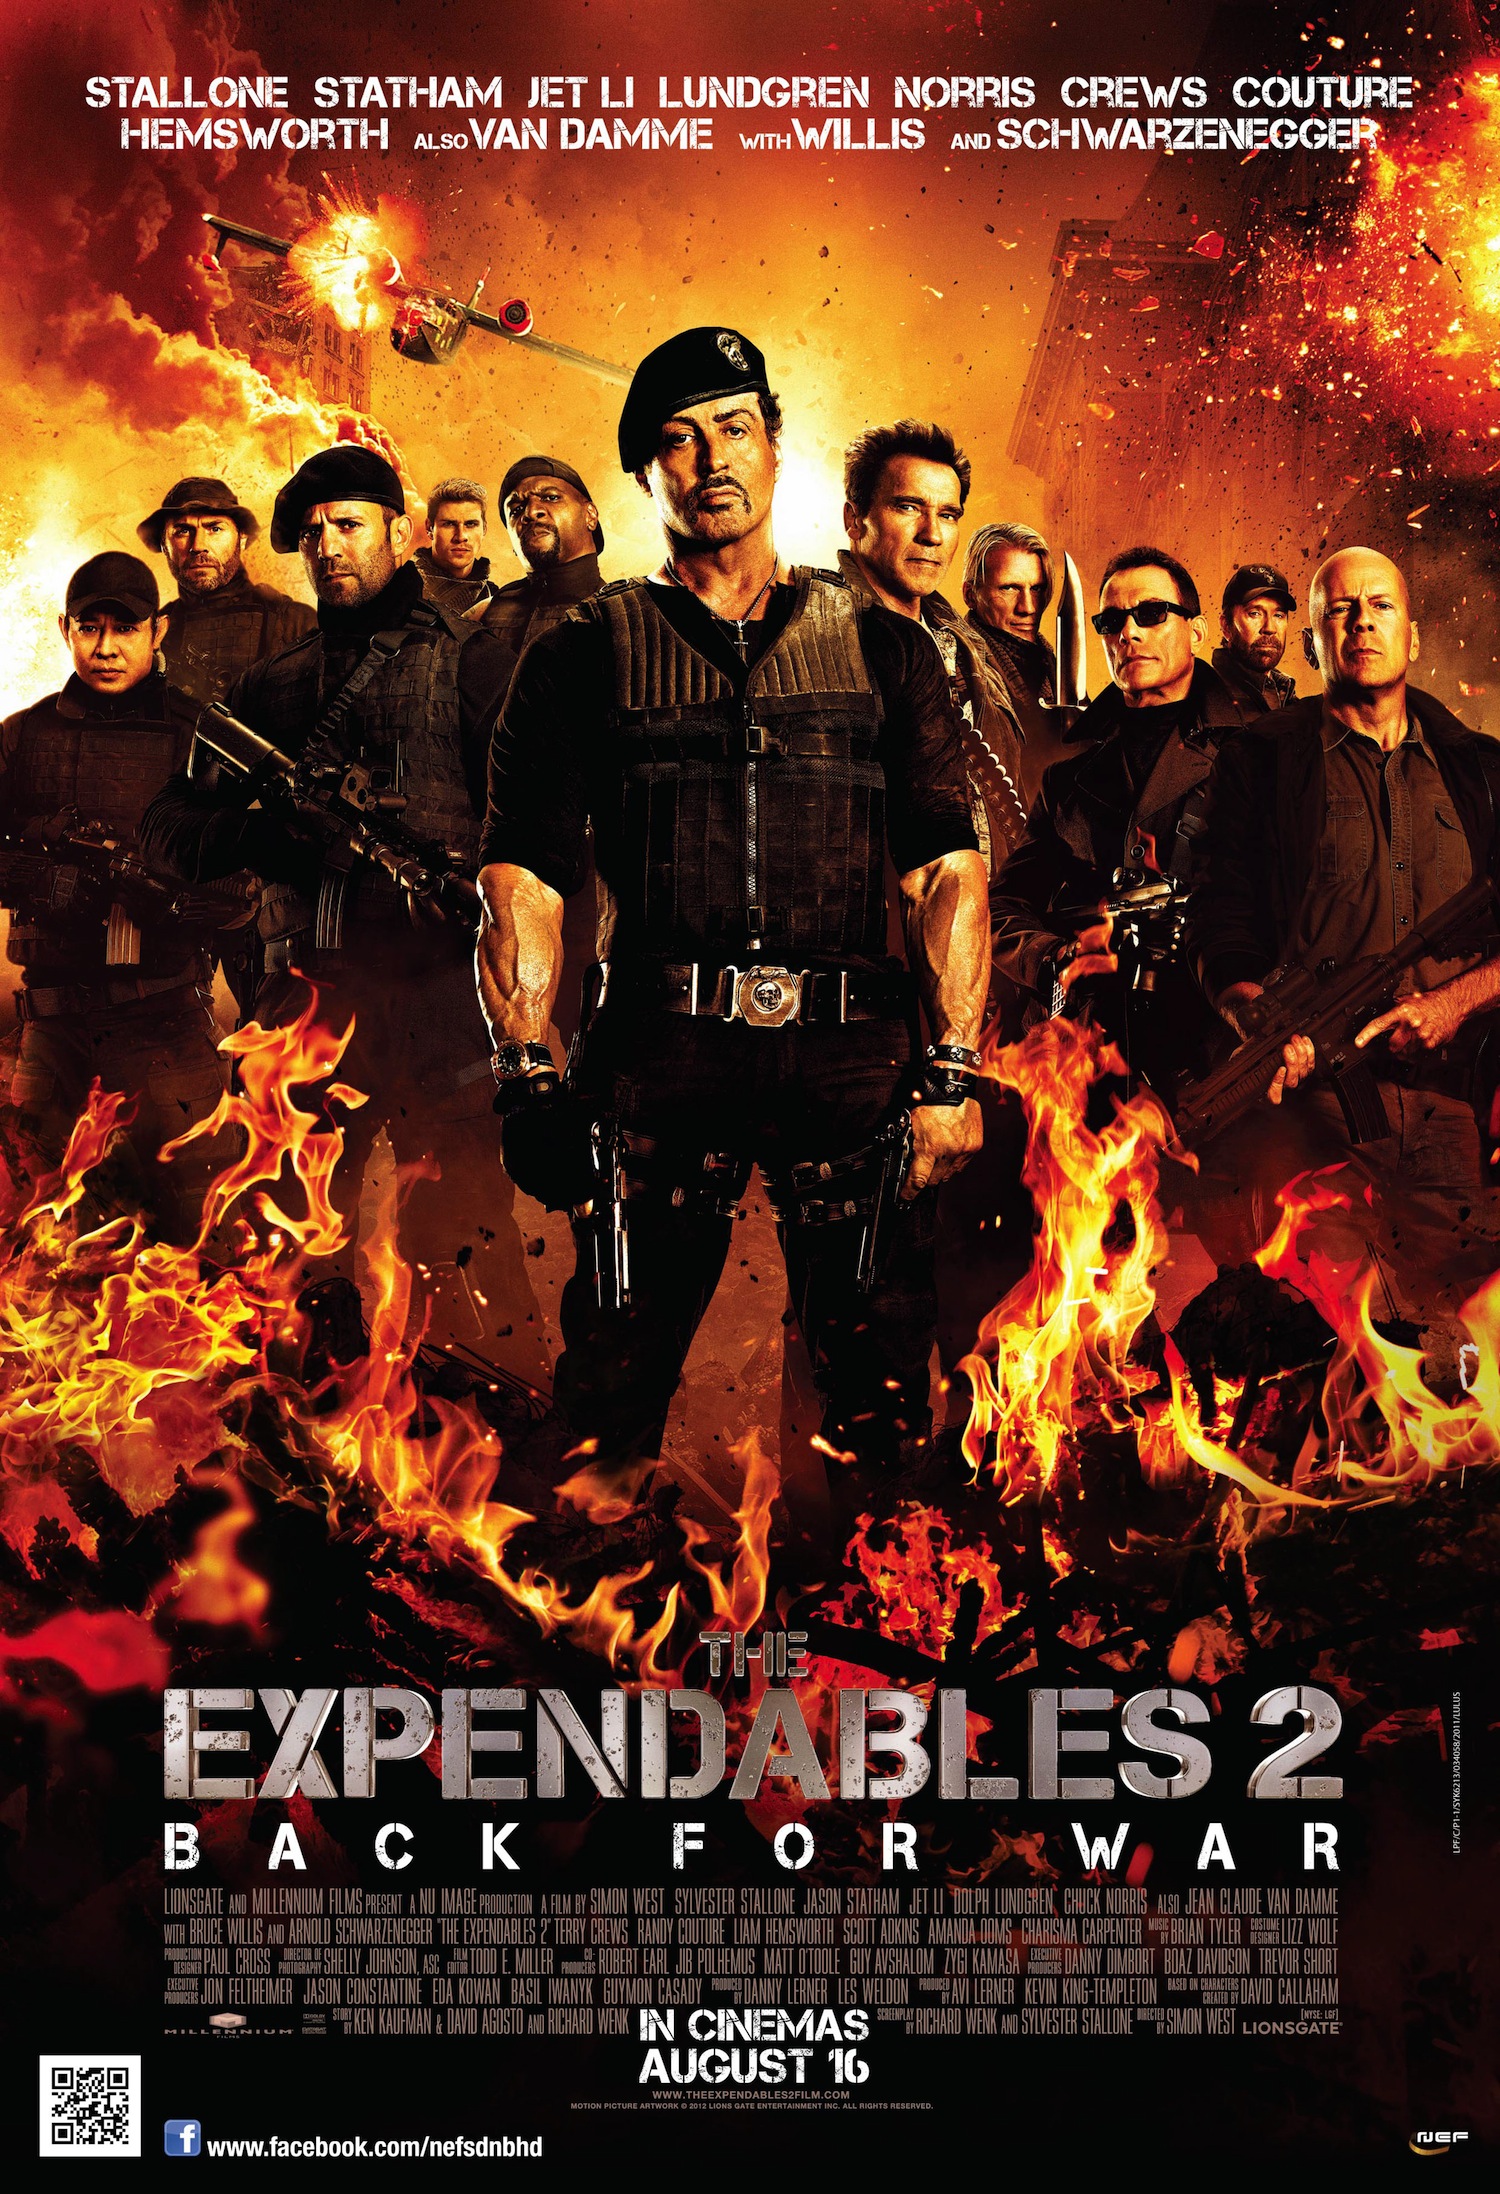 Win special screening passes to watch The Expendables 2 at our next Driven Movie Night!